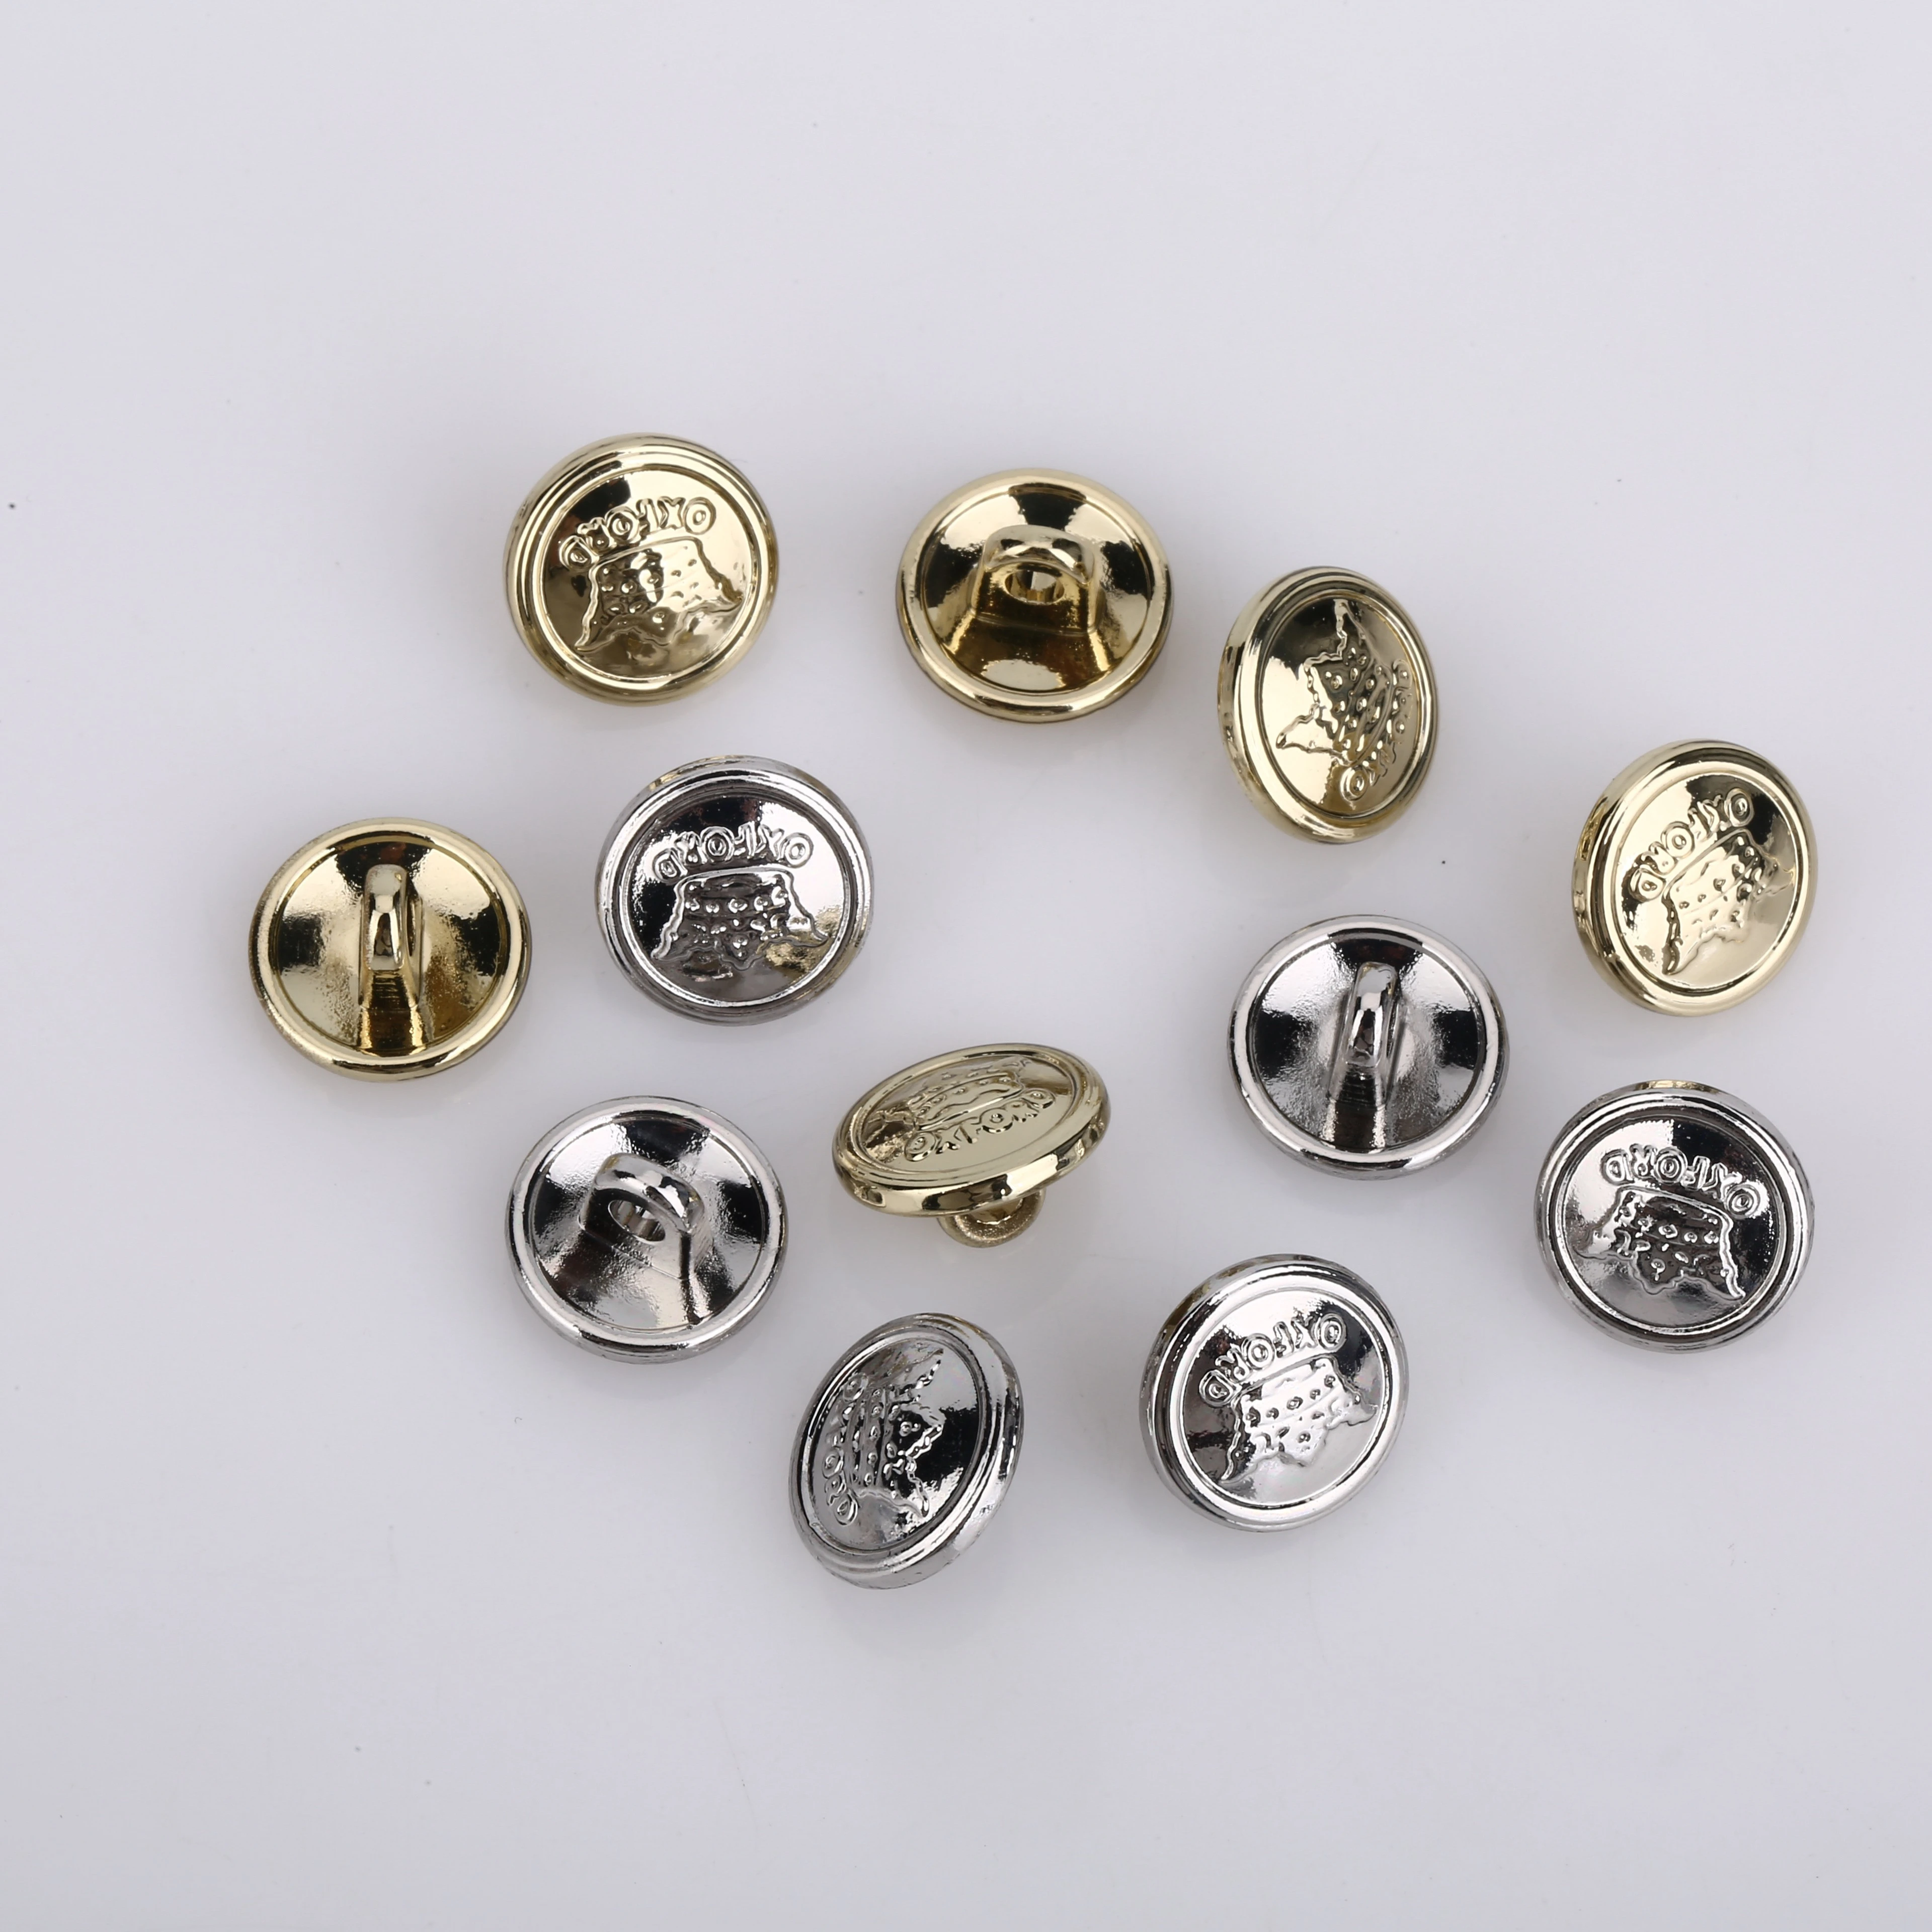 New design washable sewing alloy jeans buttons for clothing jeans